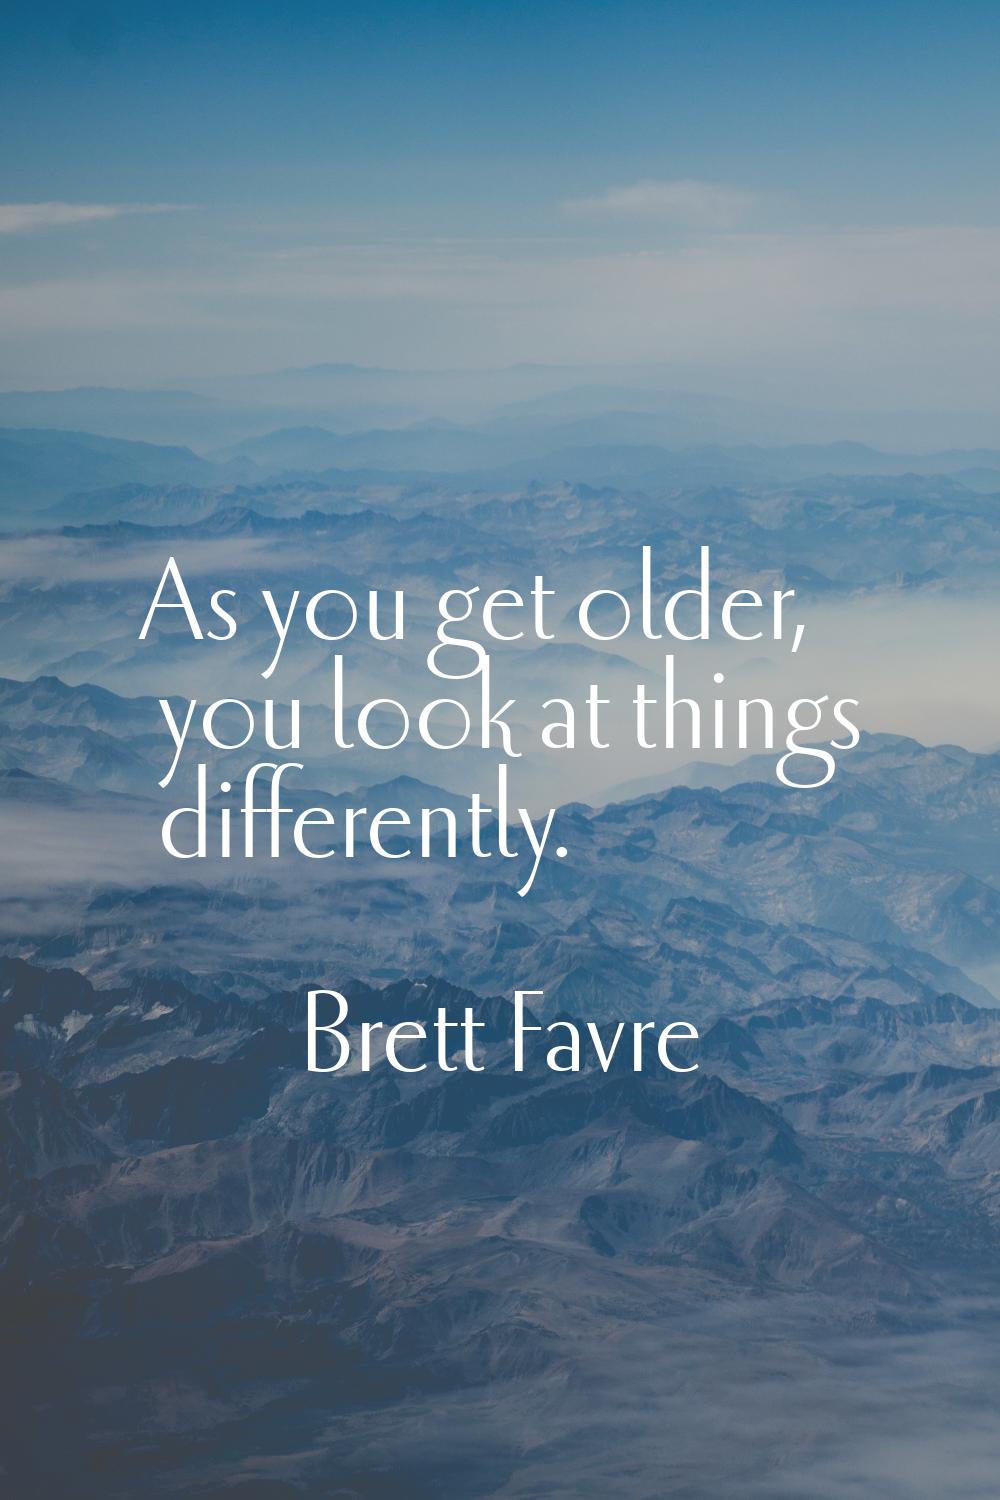 As you get older, you look at things differently.